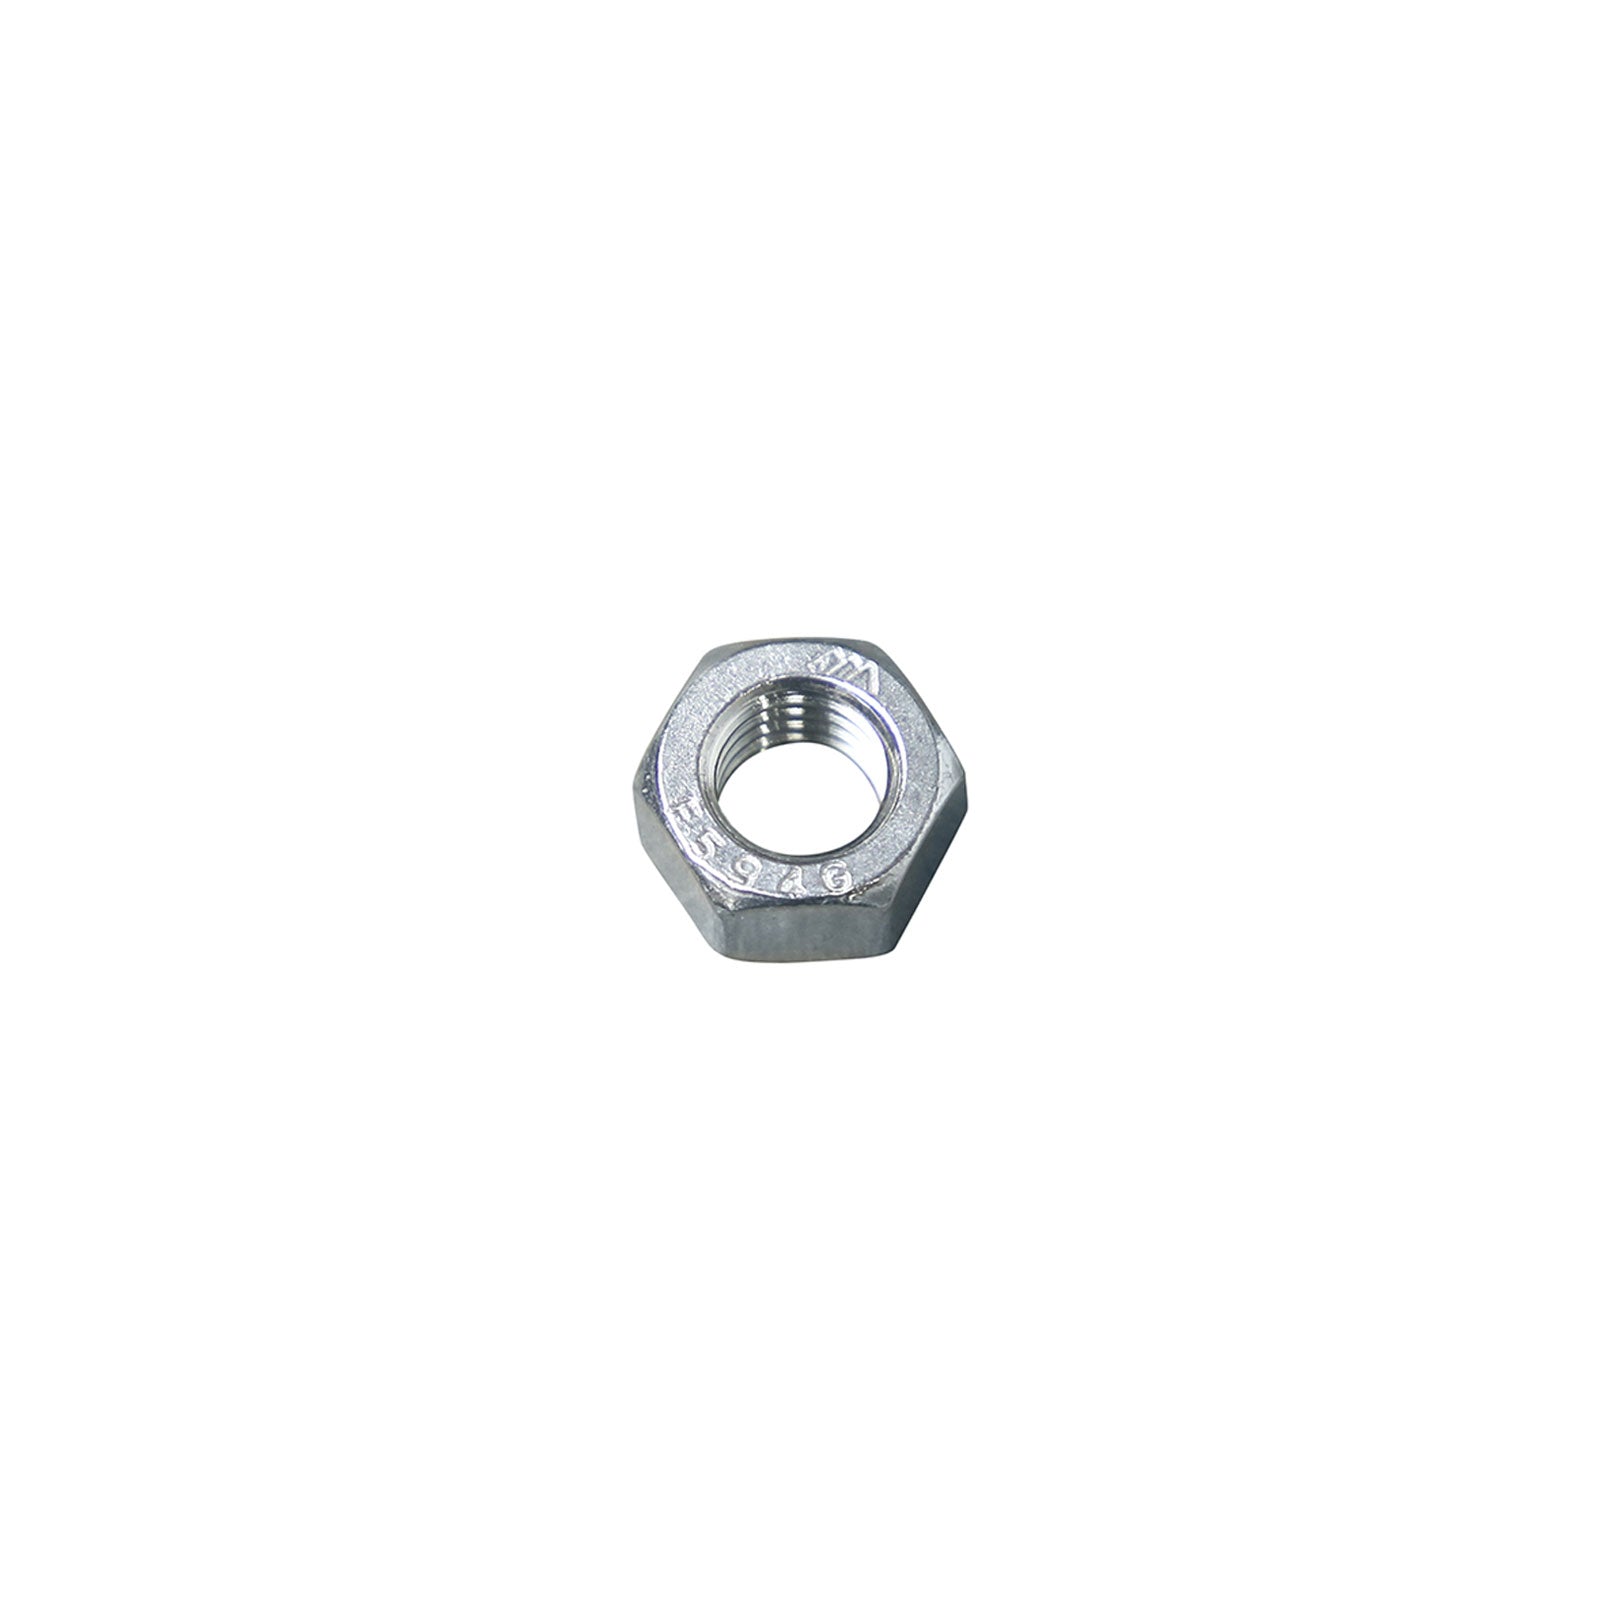 3/8"-16 Conquest Hex Nut - 316 Stainless Steel